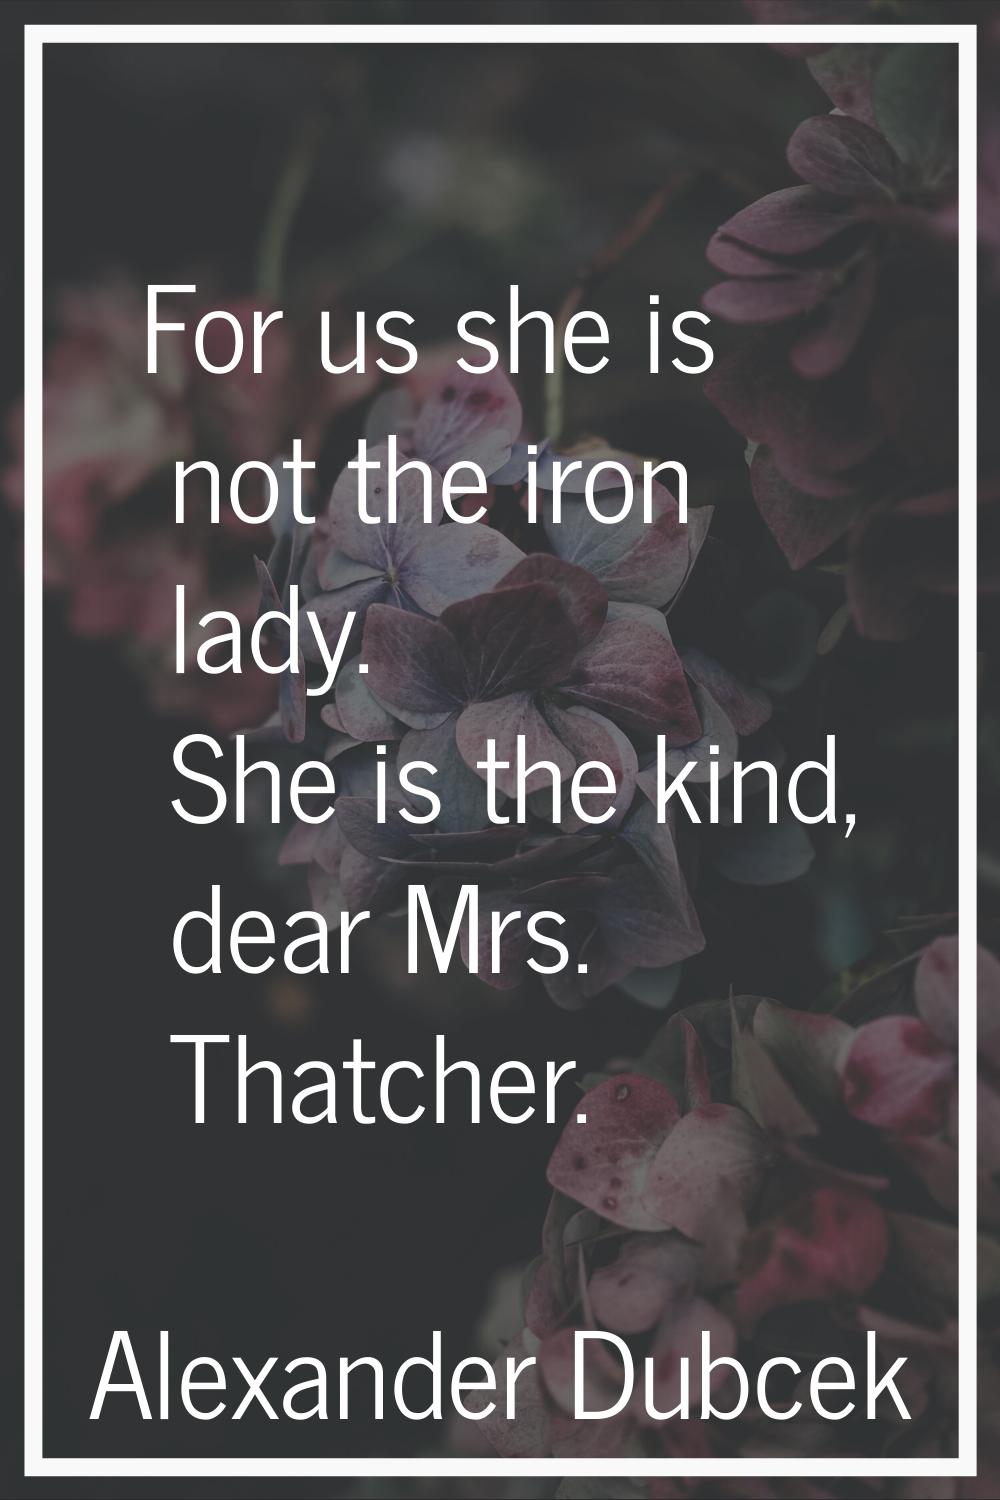 For us she is not the iron lady. She is the kind, dear Mrs. Thatcher.